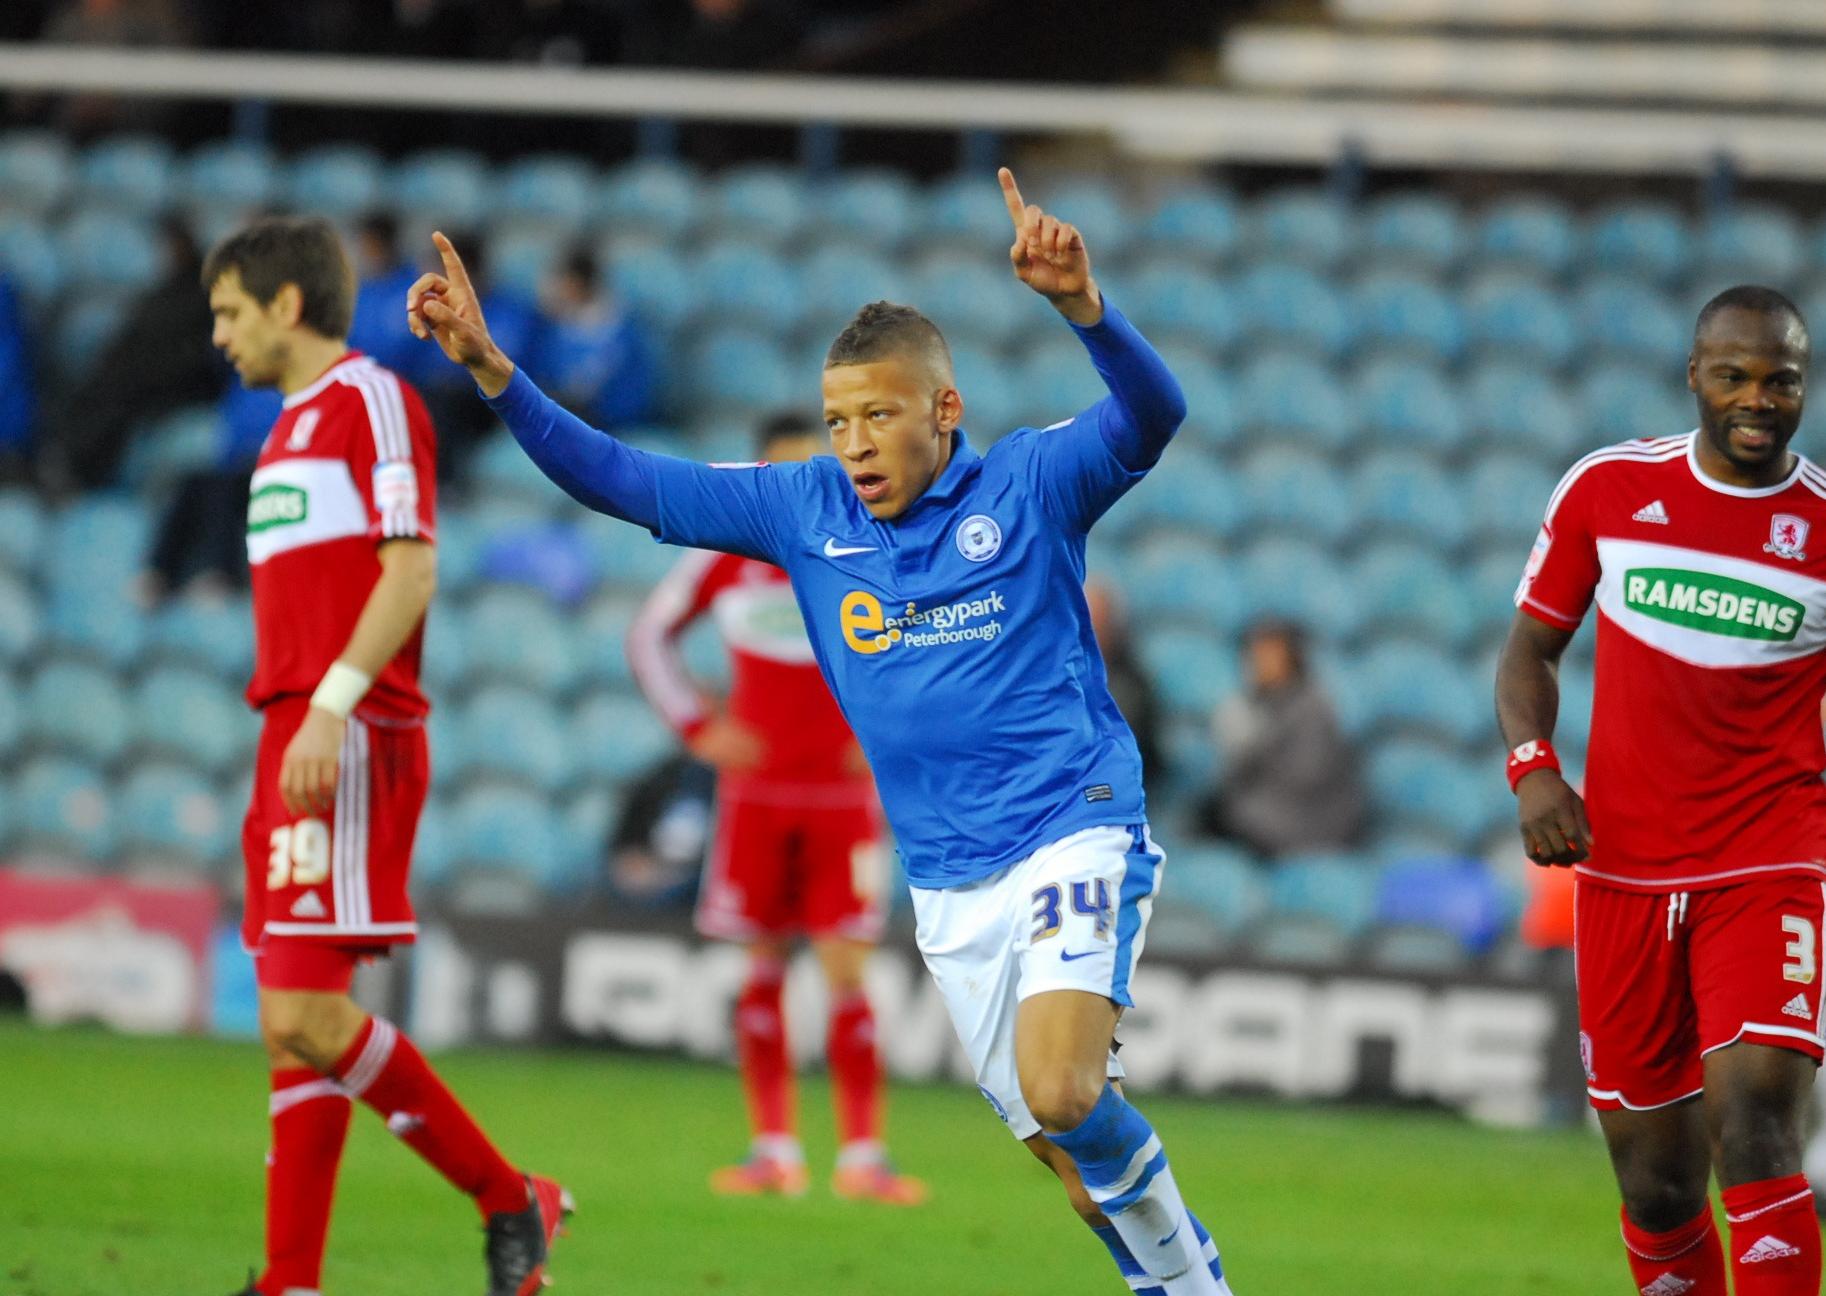 Posh have been blessed with some great players in the 2010s, but striker Dwight Gayle was the best of them all.